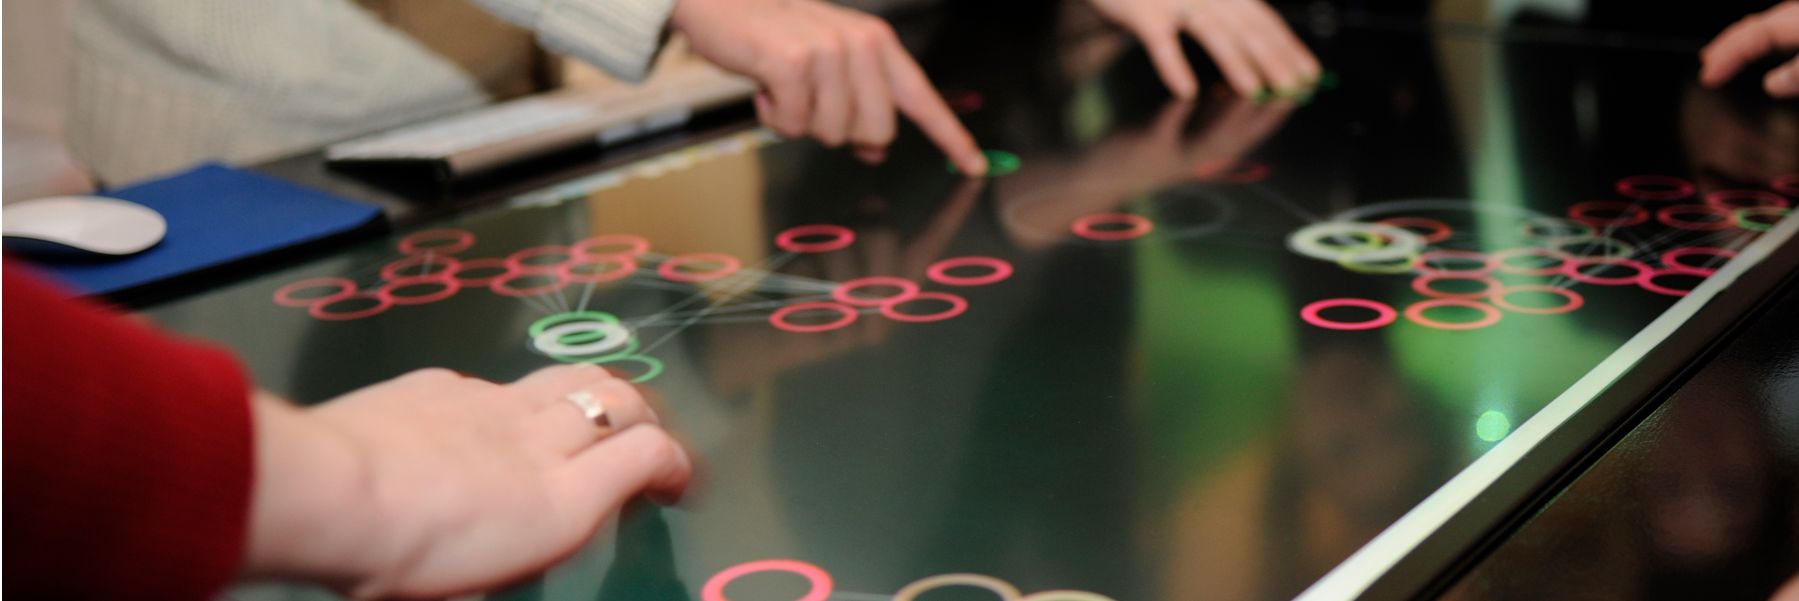 hands on a multi touch table